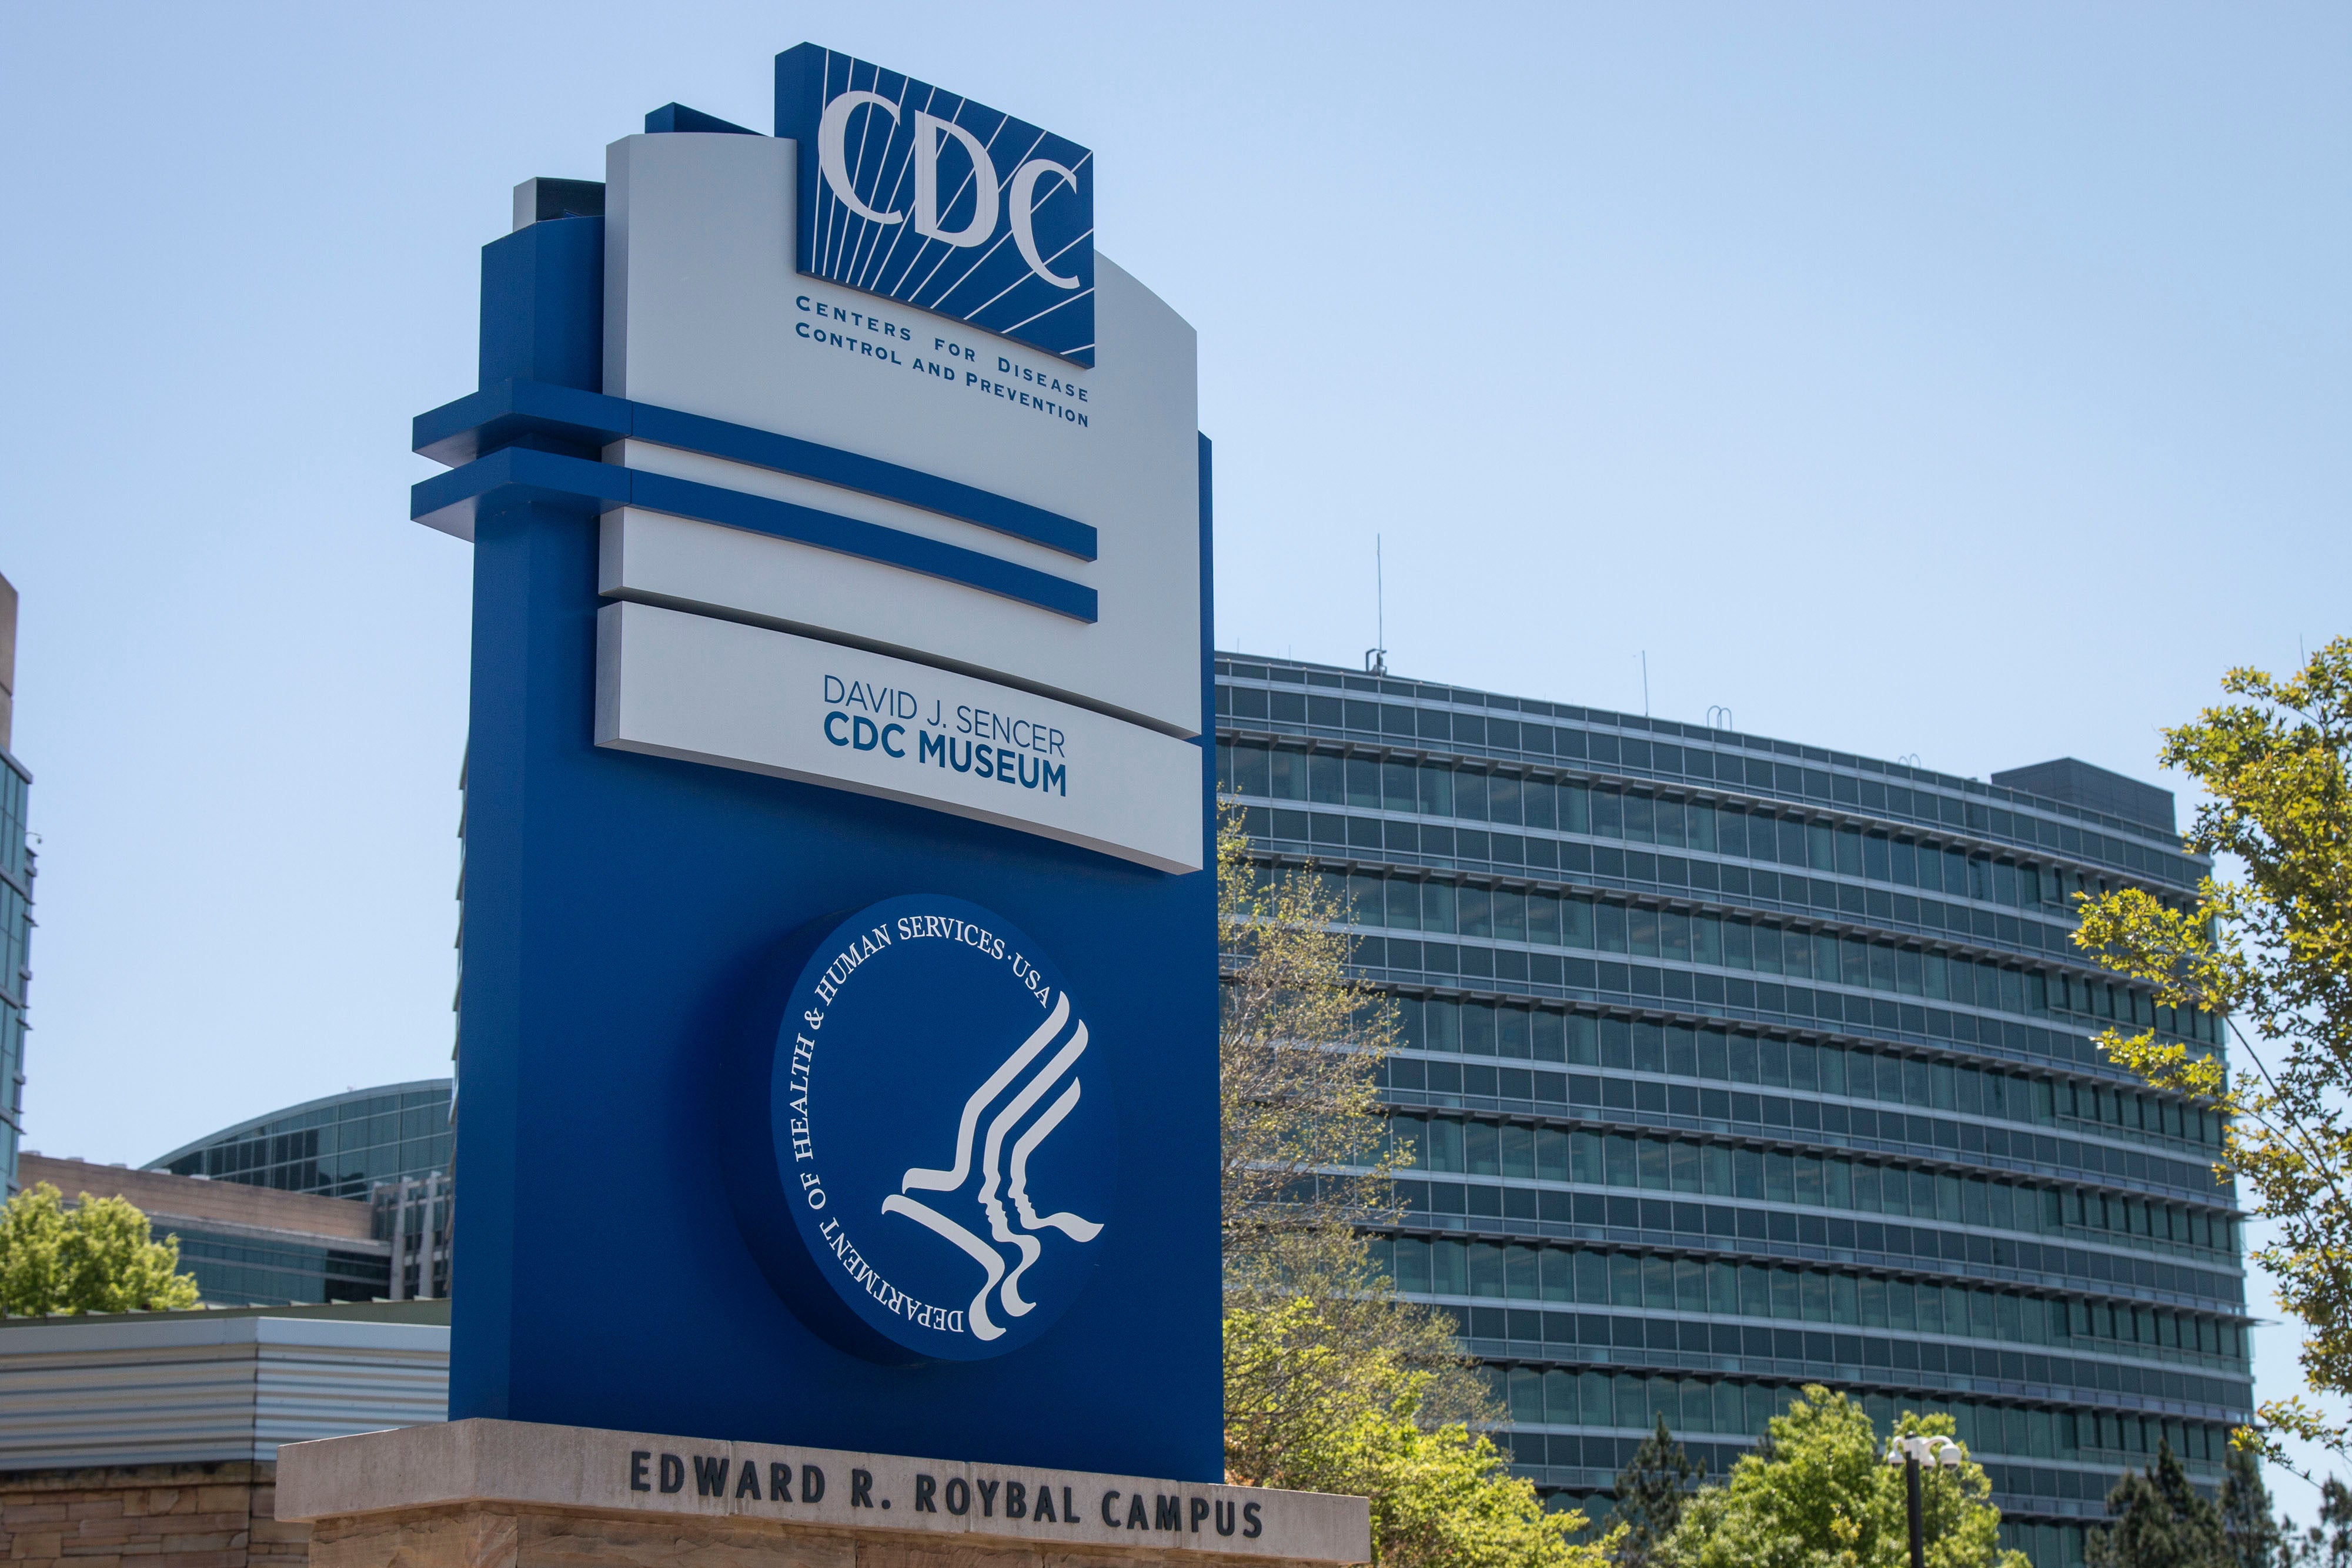 Exterior of the CDC building